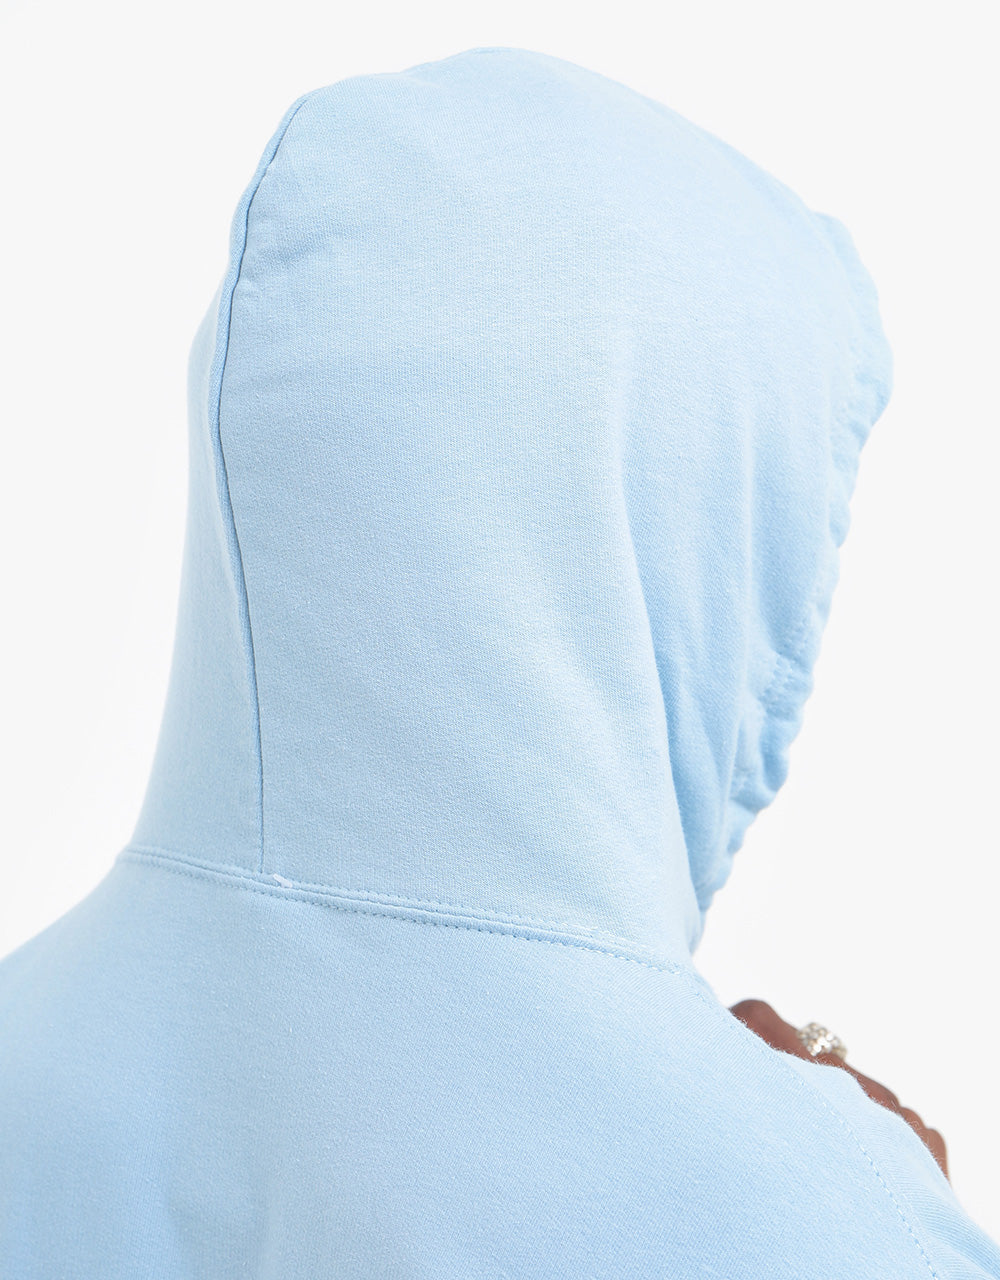 Route One Home Video Pullover Hoodie - Light Blue